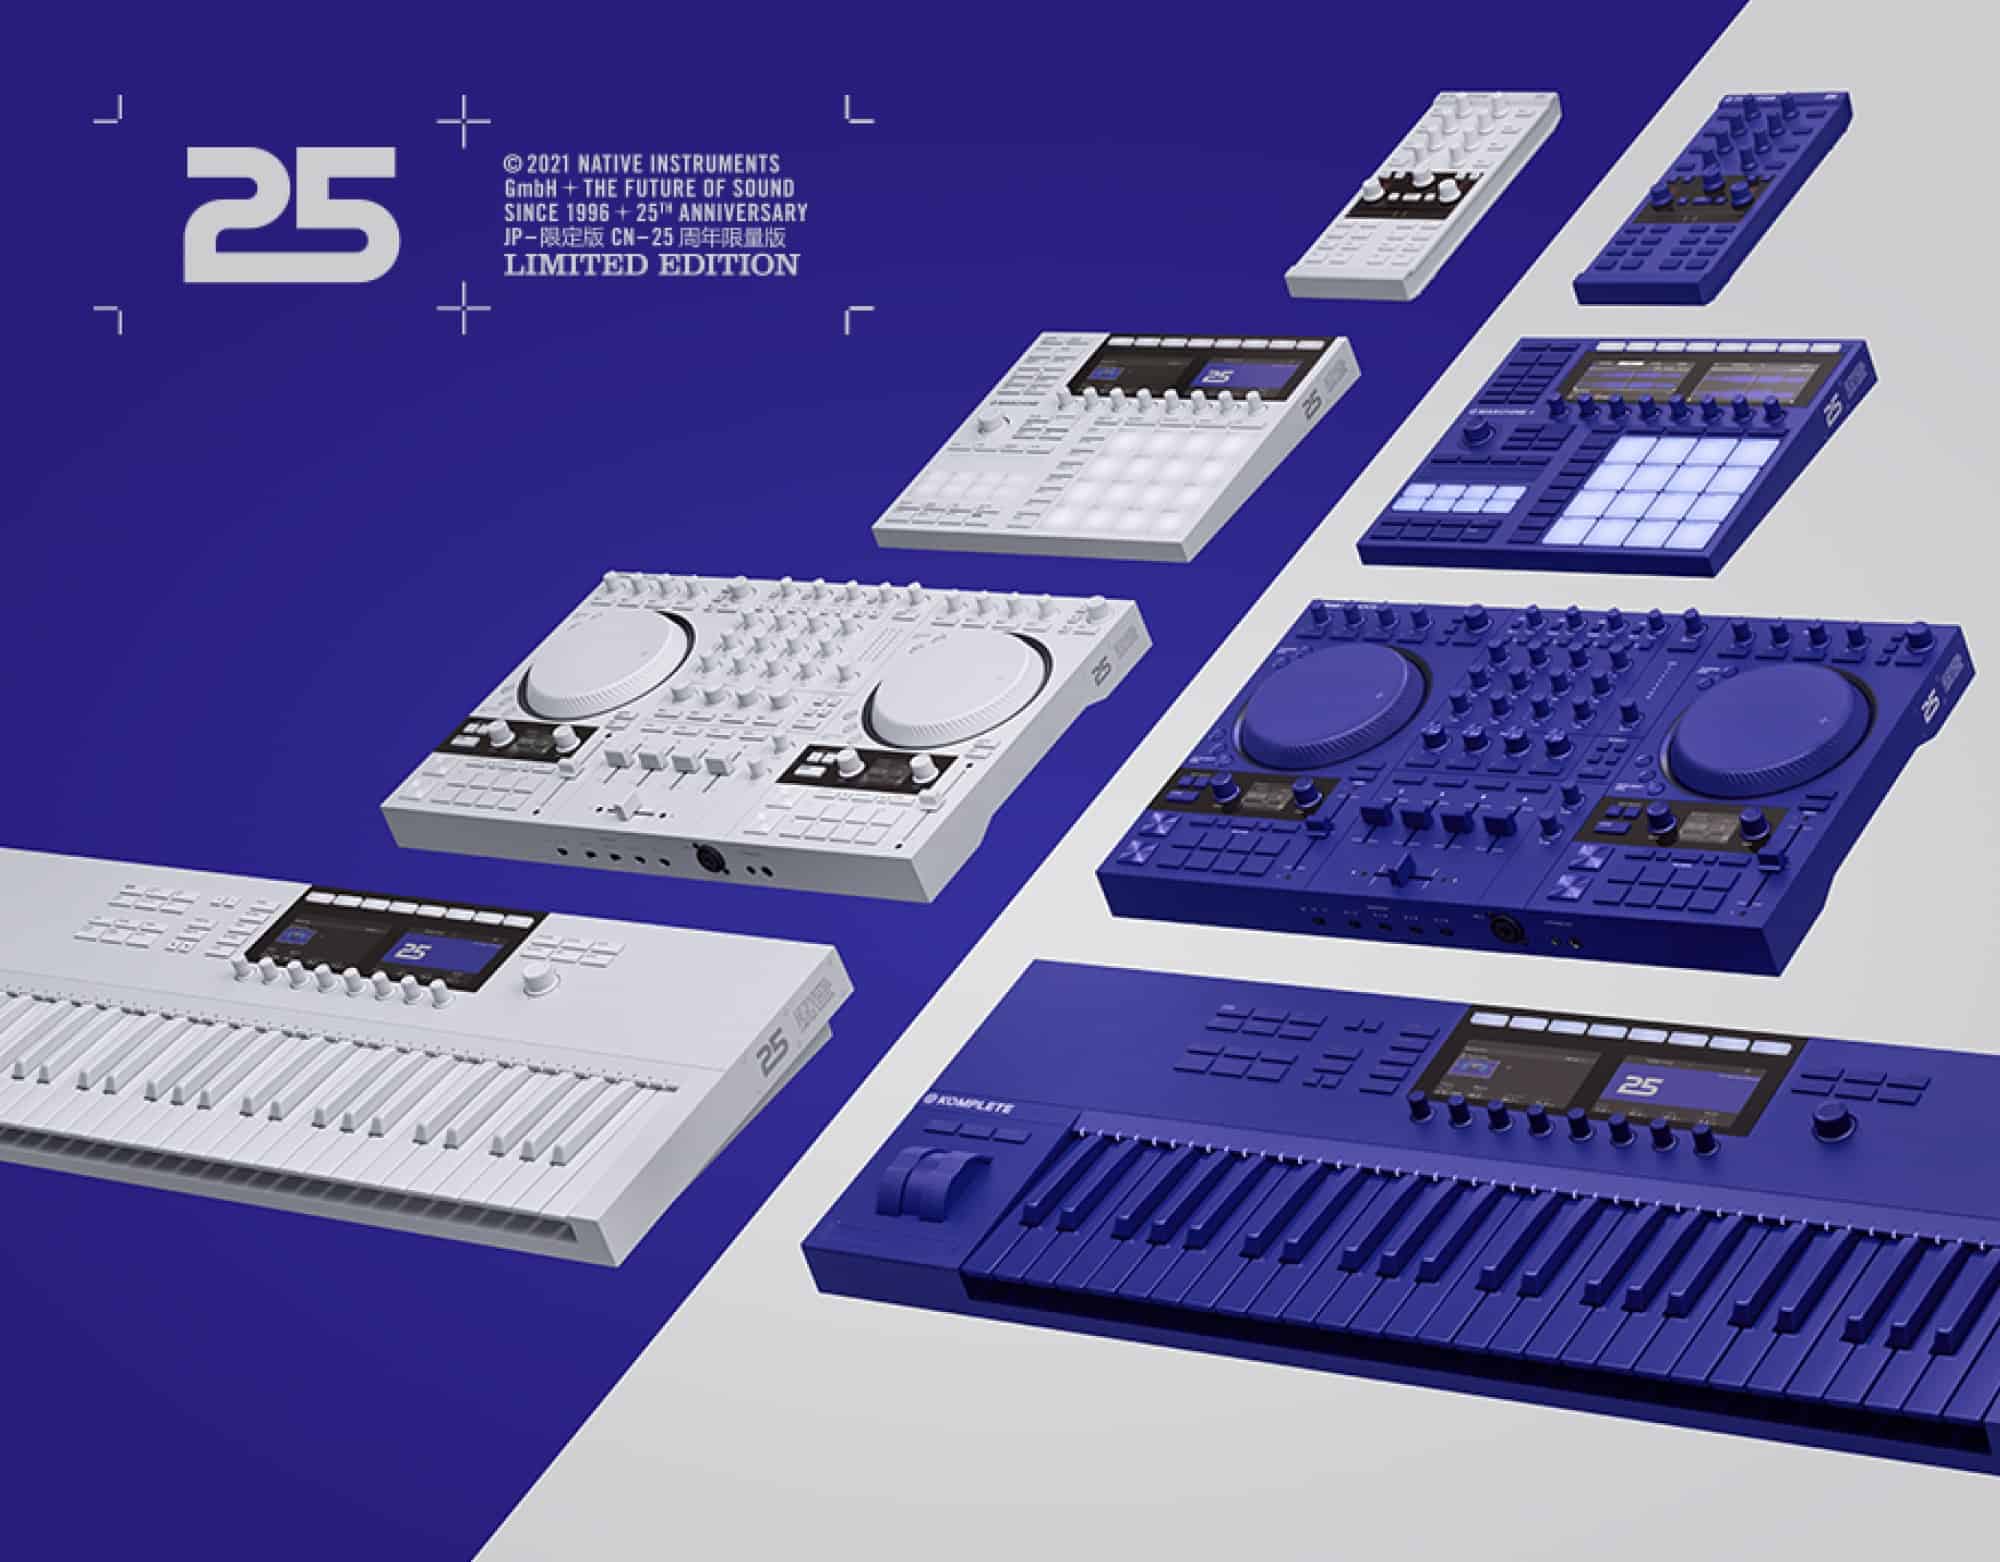 Native-Instruments-Celebrates-25th-Anniversary-with-Limited-Edition-Hardware-and-Free-Instrument-main